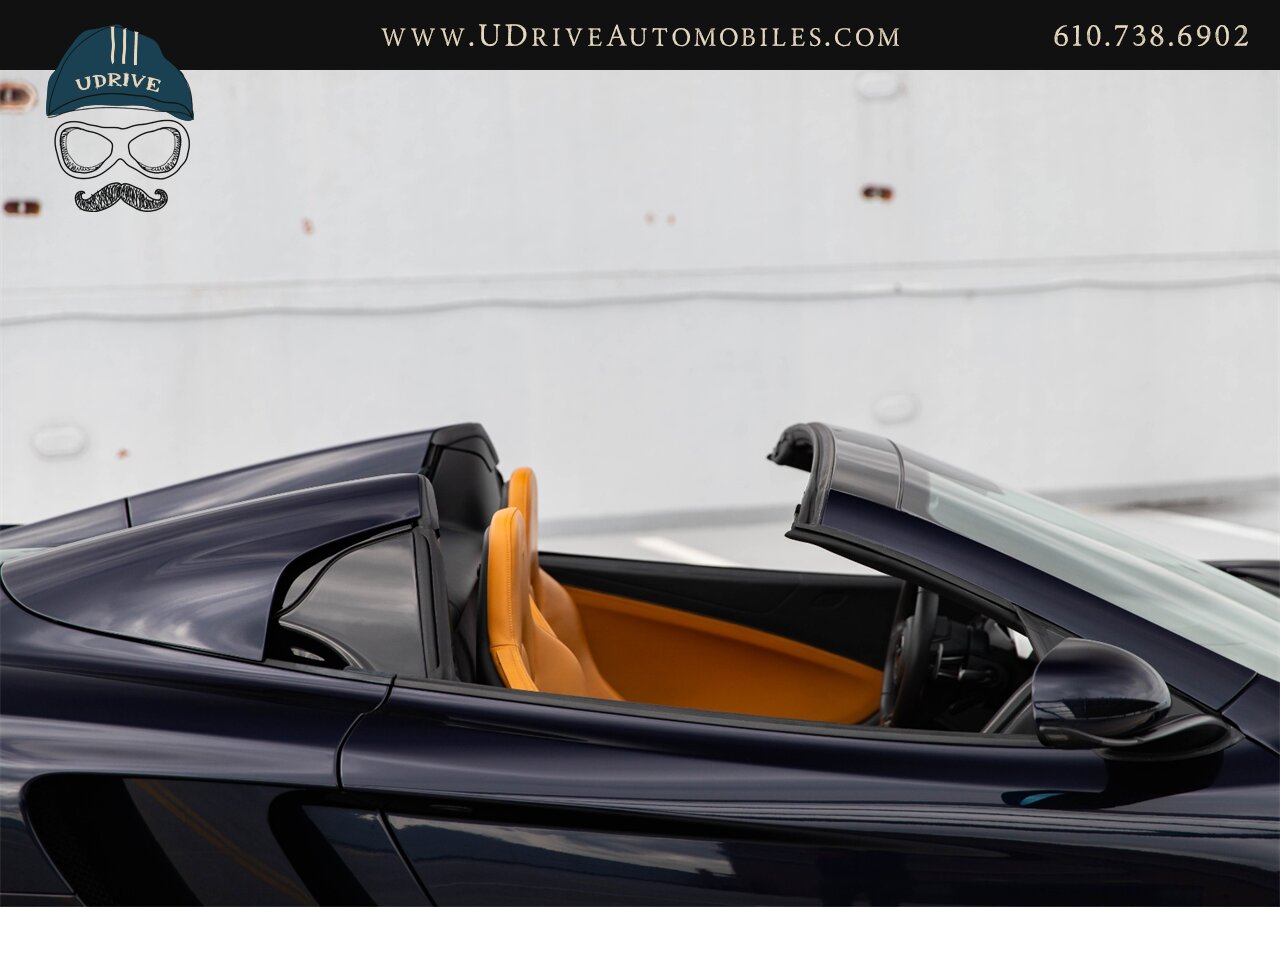 2013 McLaren MP4-12C Spider 1 Owner 6k Miles Carbon Fiber Full Leather  Sapphire Black over Natural Tan Leather - Photo 18 - West Chester, PA 19382